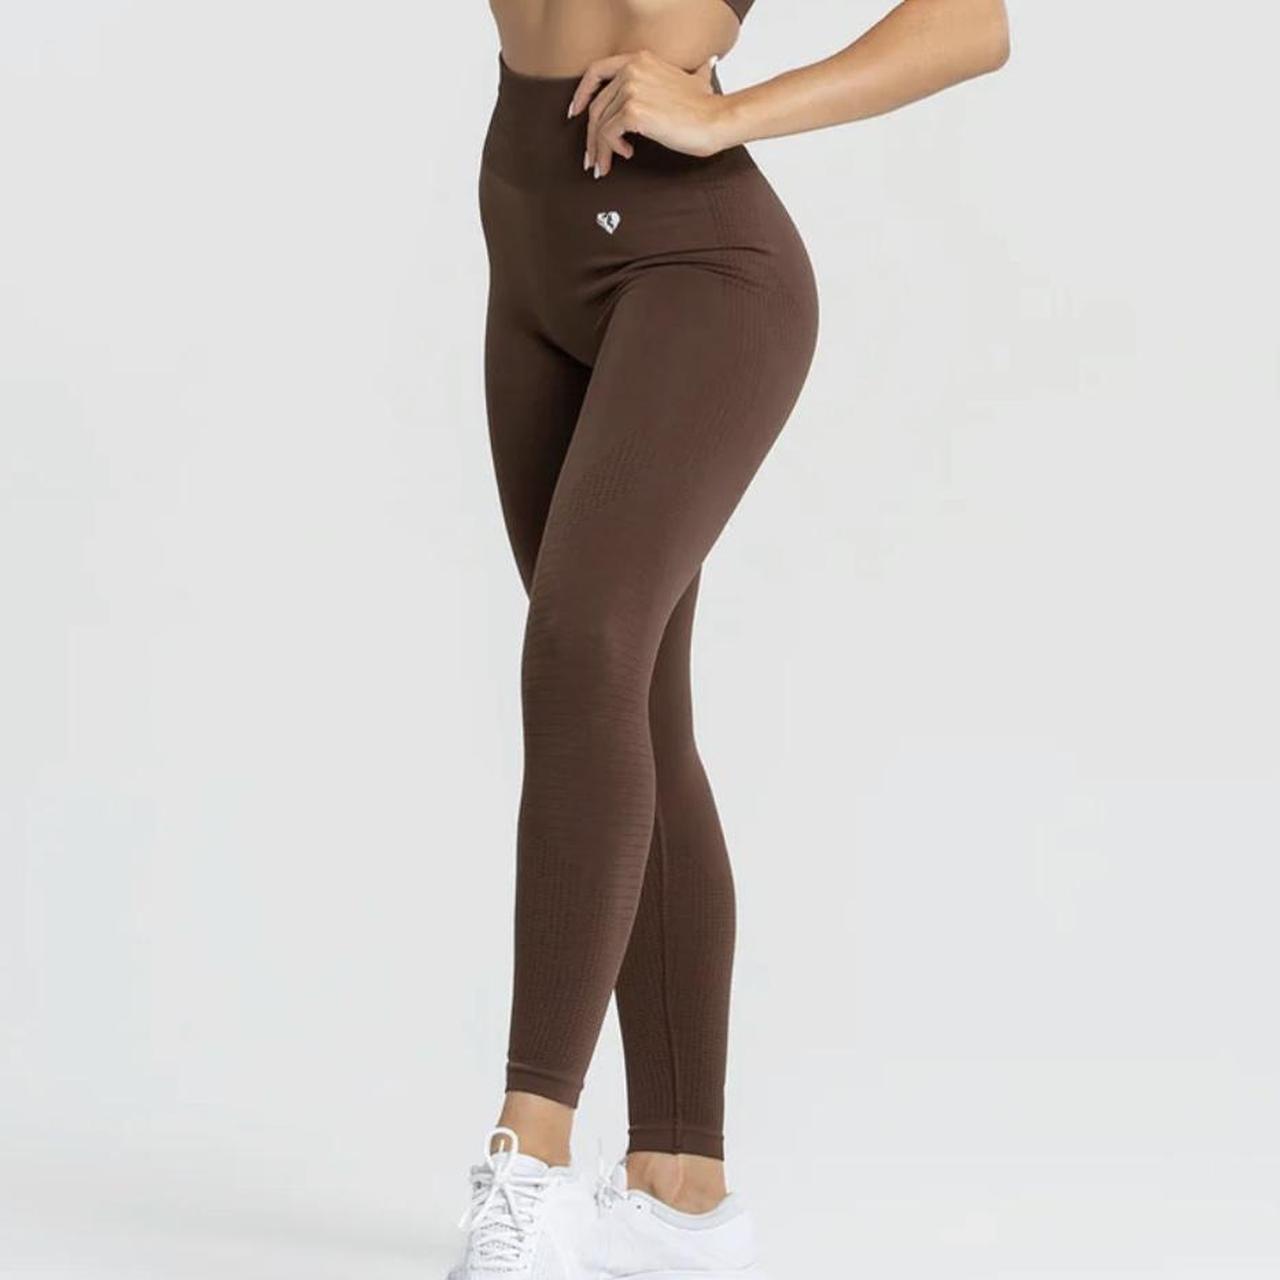 Sporty Rich Runner High Waisted Leggings In Espresso And, 59% OFF